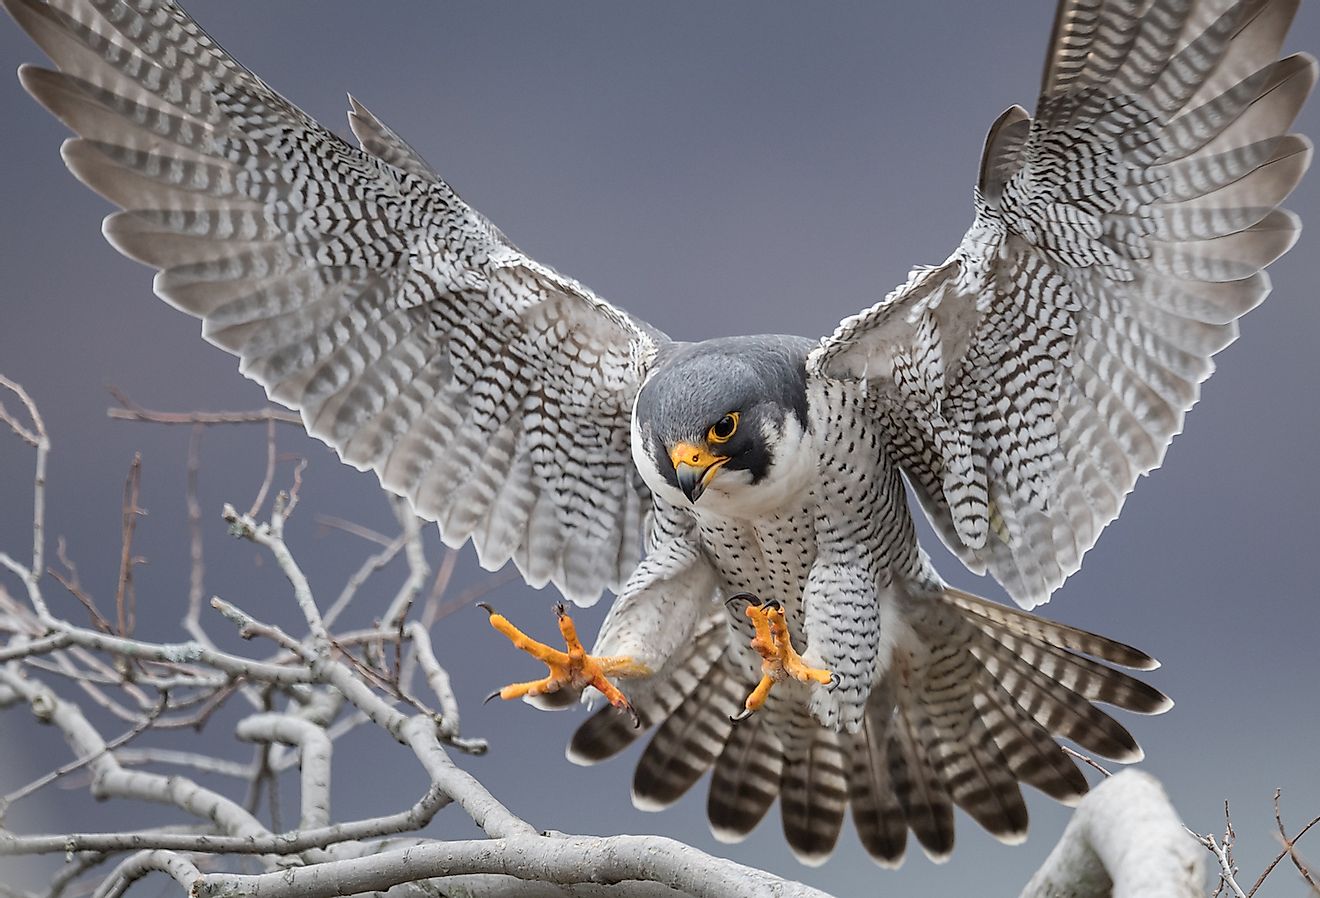 Peregrine Falcon in New Jersey. Image credit: Harry Collins Photography/Shutterstock.com